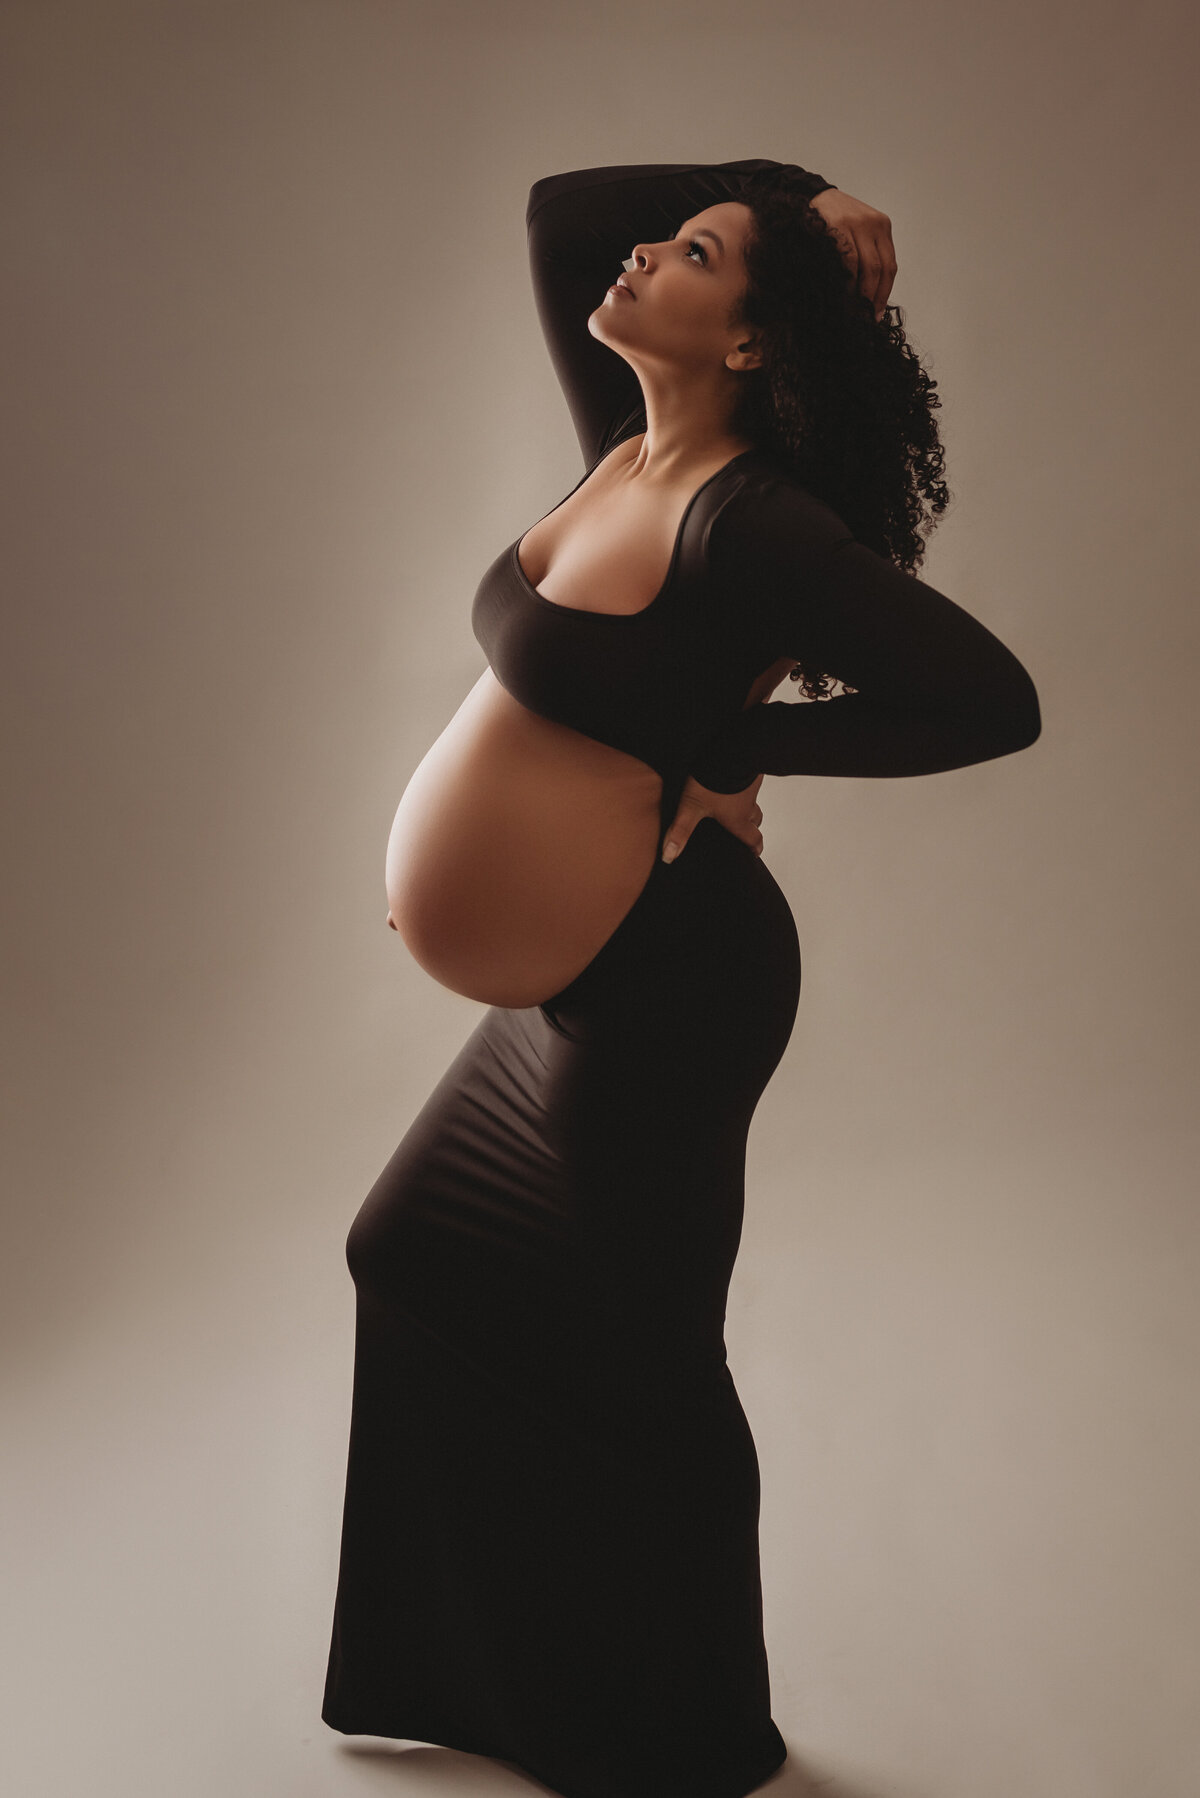 High end maternity photo shoot in Atlanta with Marietta, GA maternity photographer showing 36 week pregnant woman dressed in a black maternity gown showing her baby bump posing on a light gray backdrop.